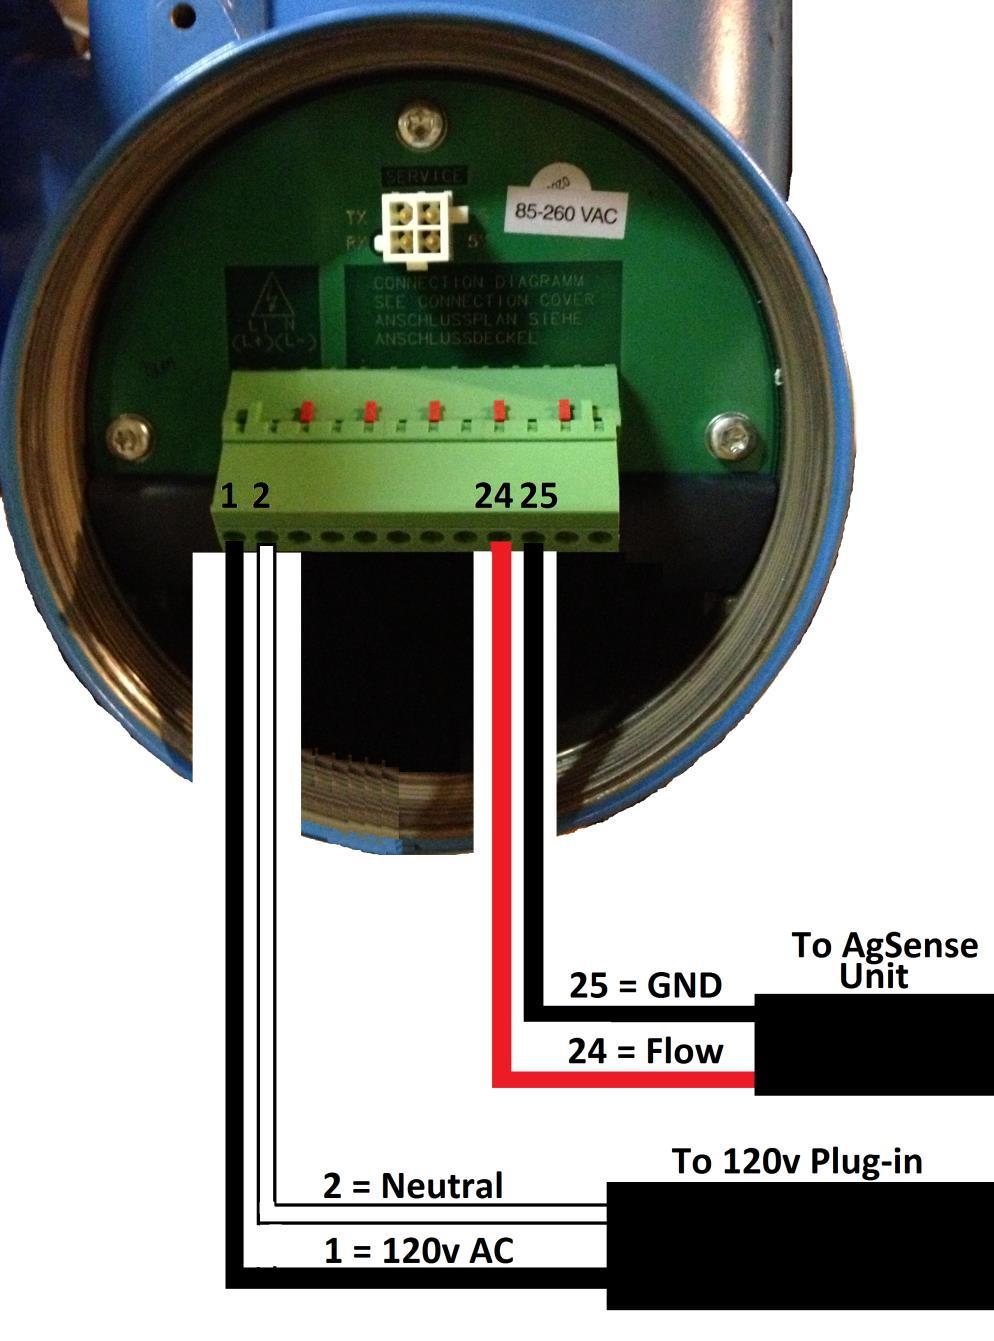 Wire Connections for the Endress Hauser Promag P 50/53 Series Flow Meter 120v powered meter shown